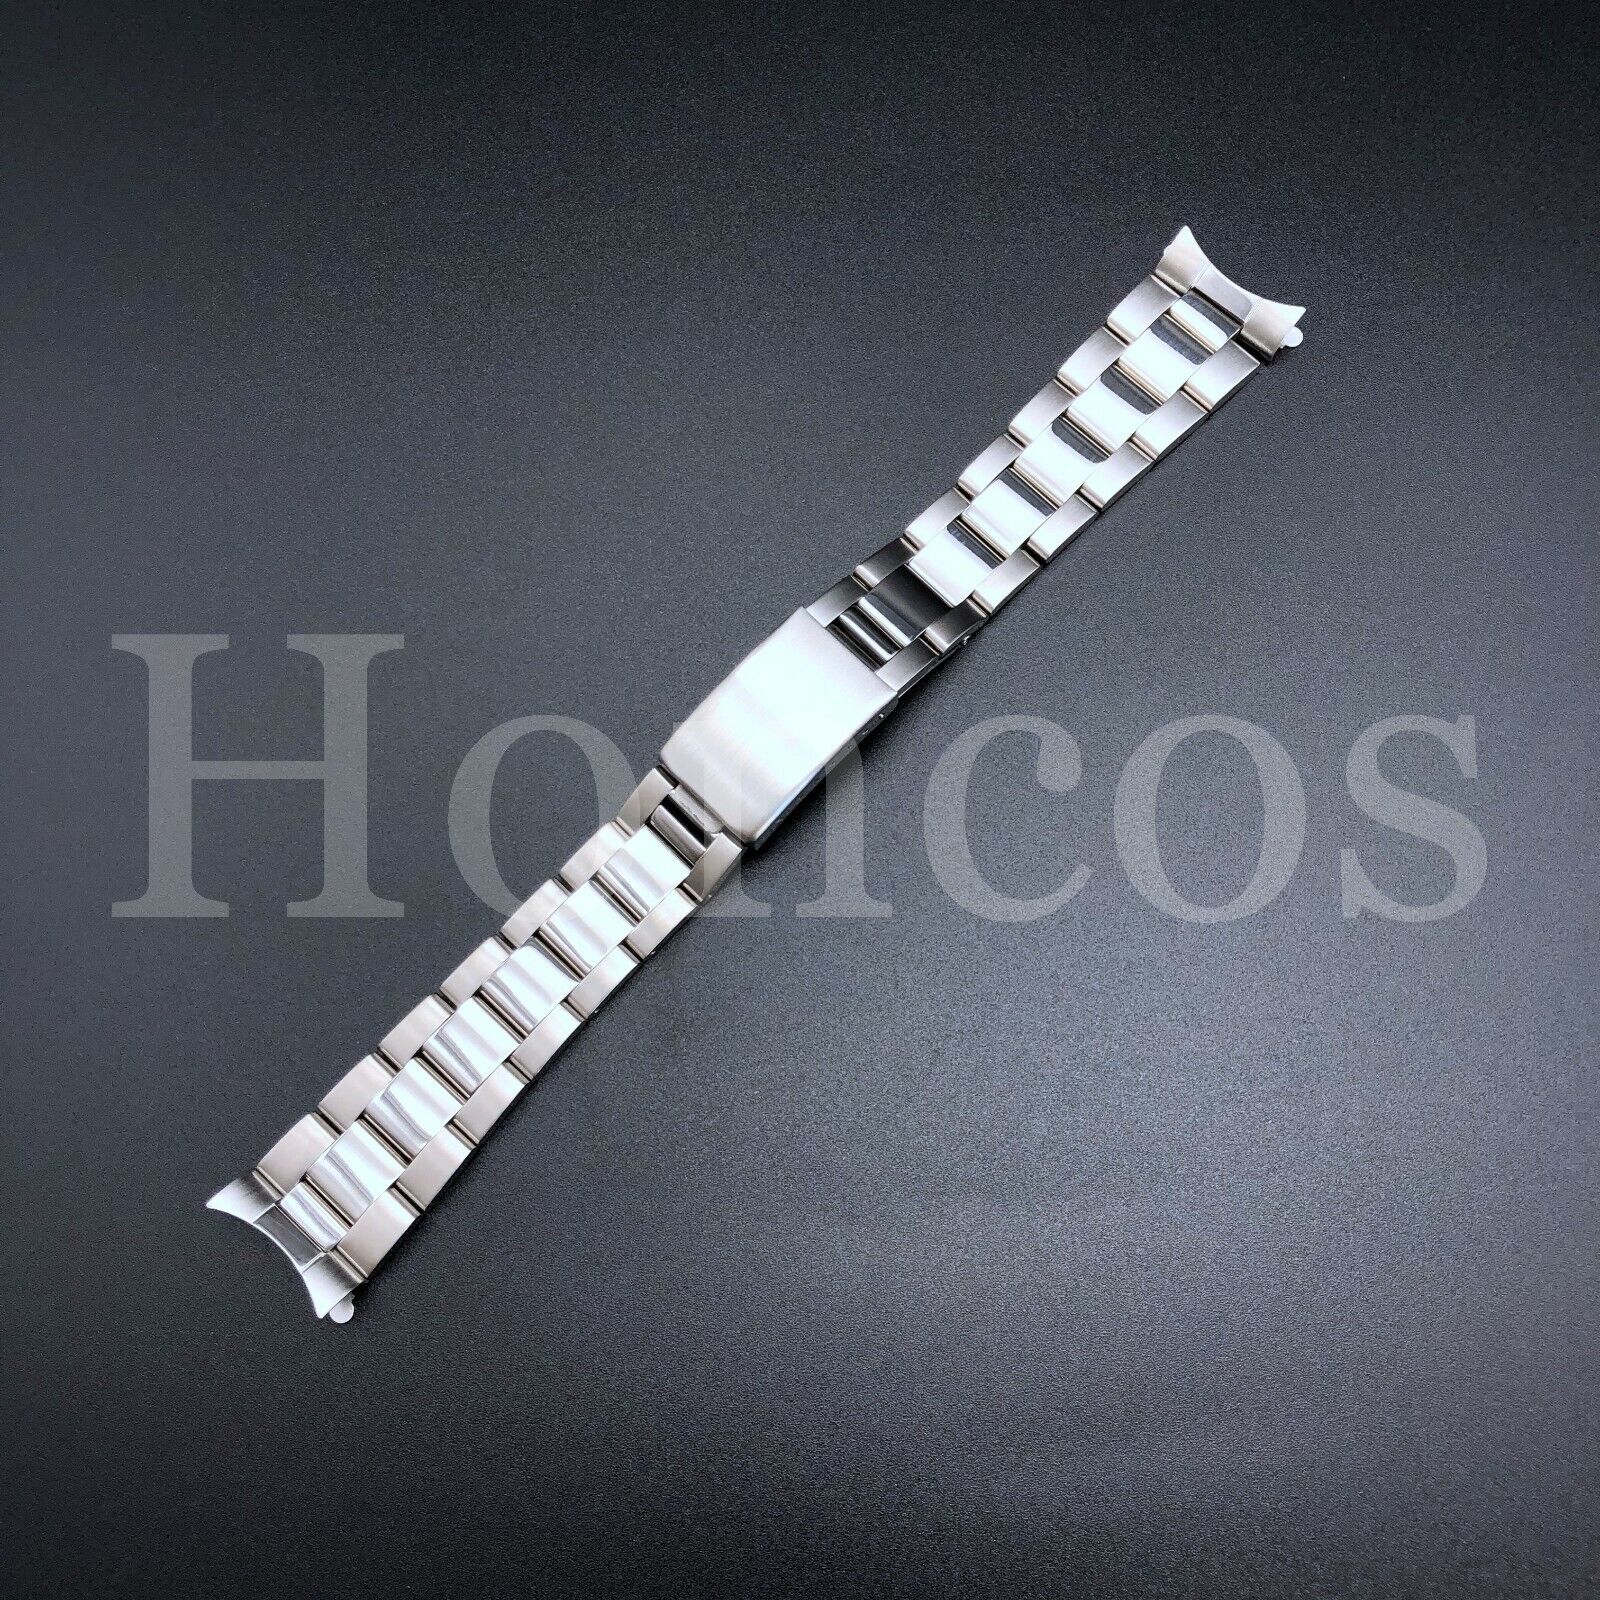 19 MM OYSTER WATCH BAND BRACELET FOR ROLEX DATEJUST 16013 16233 SILVER COLOR